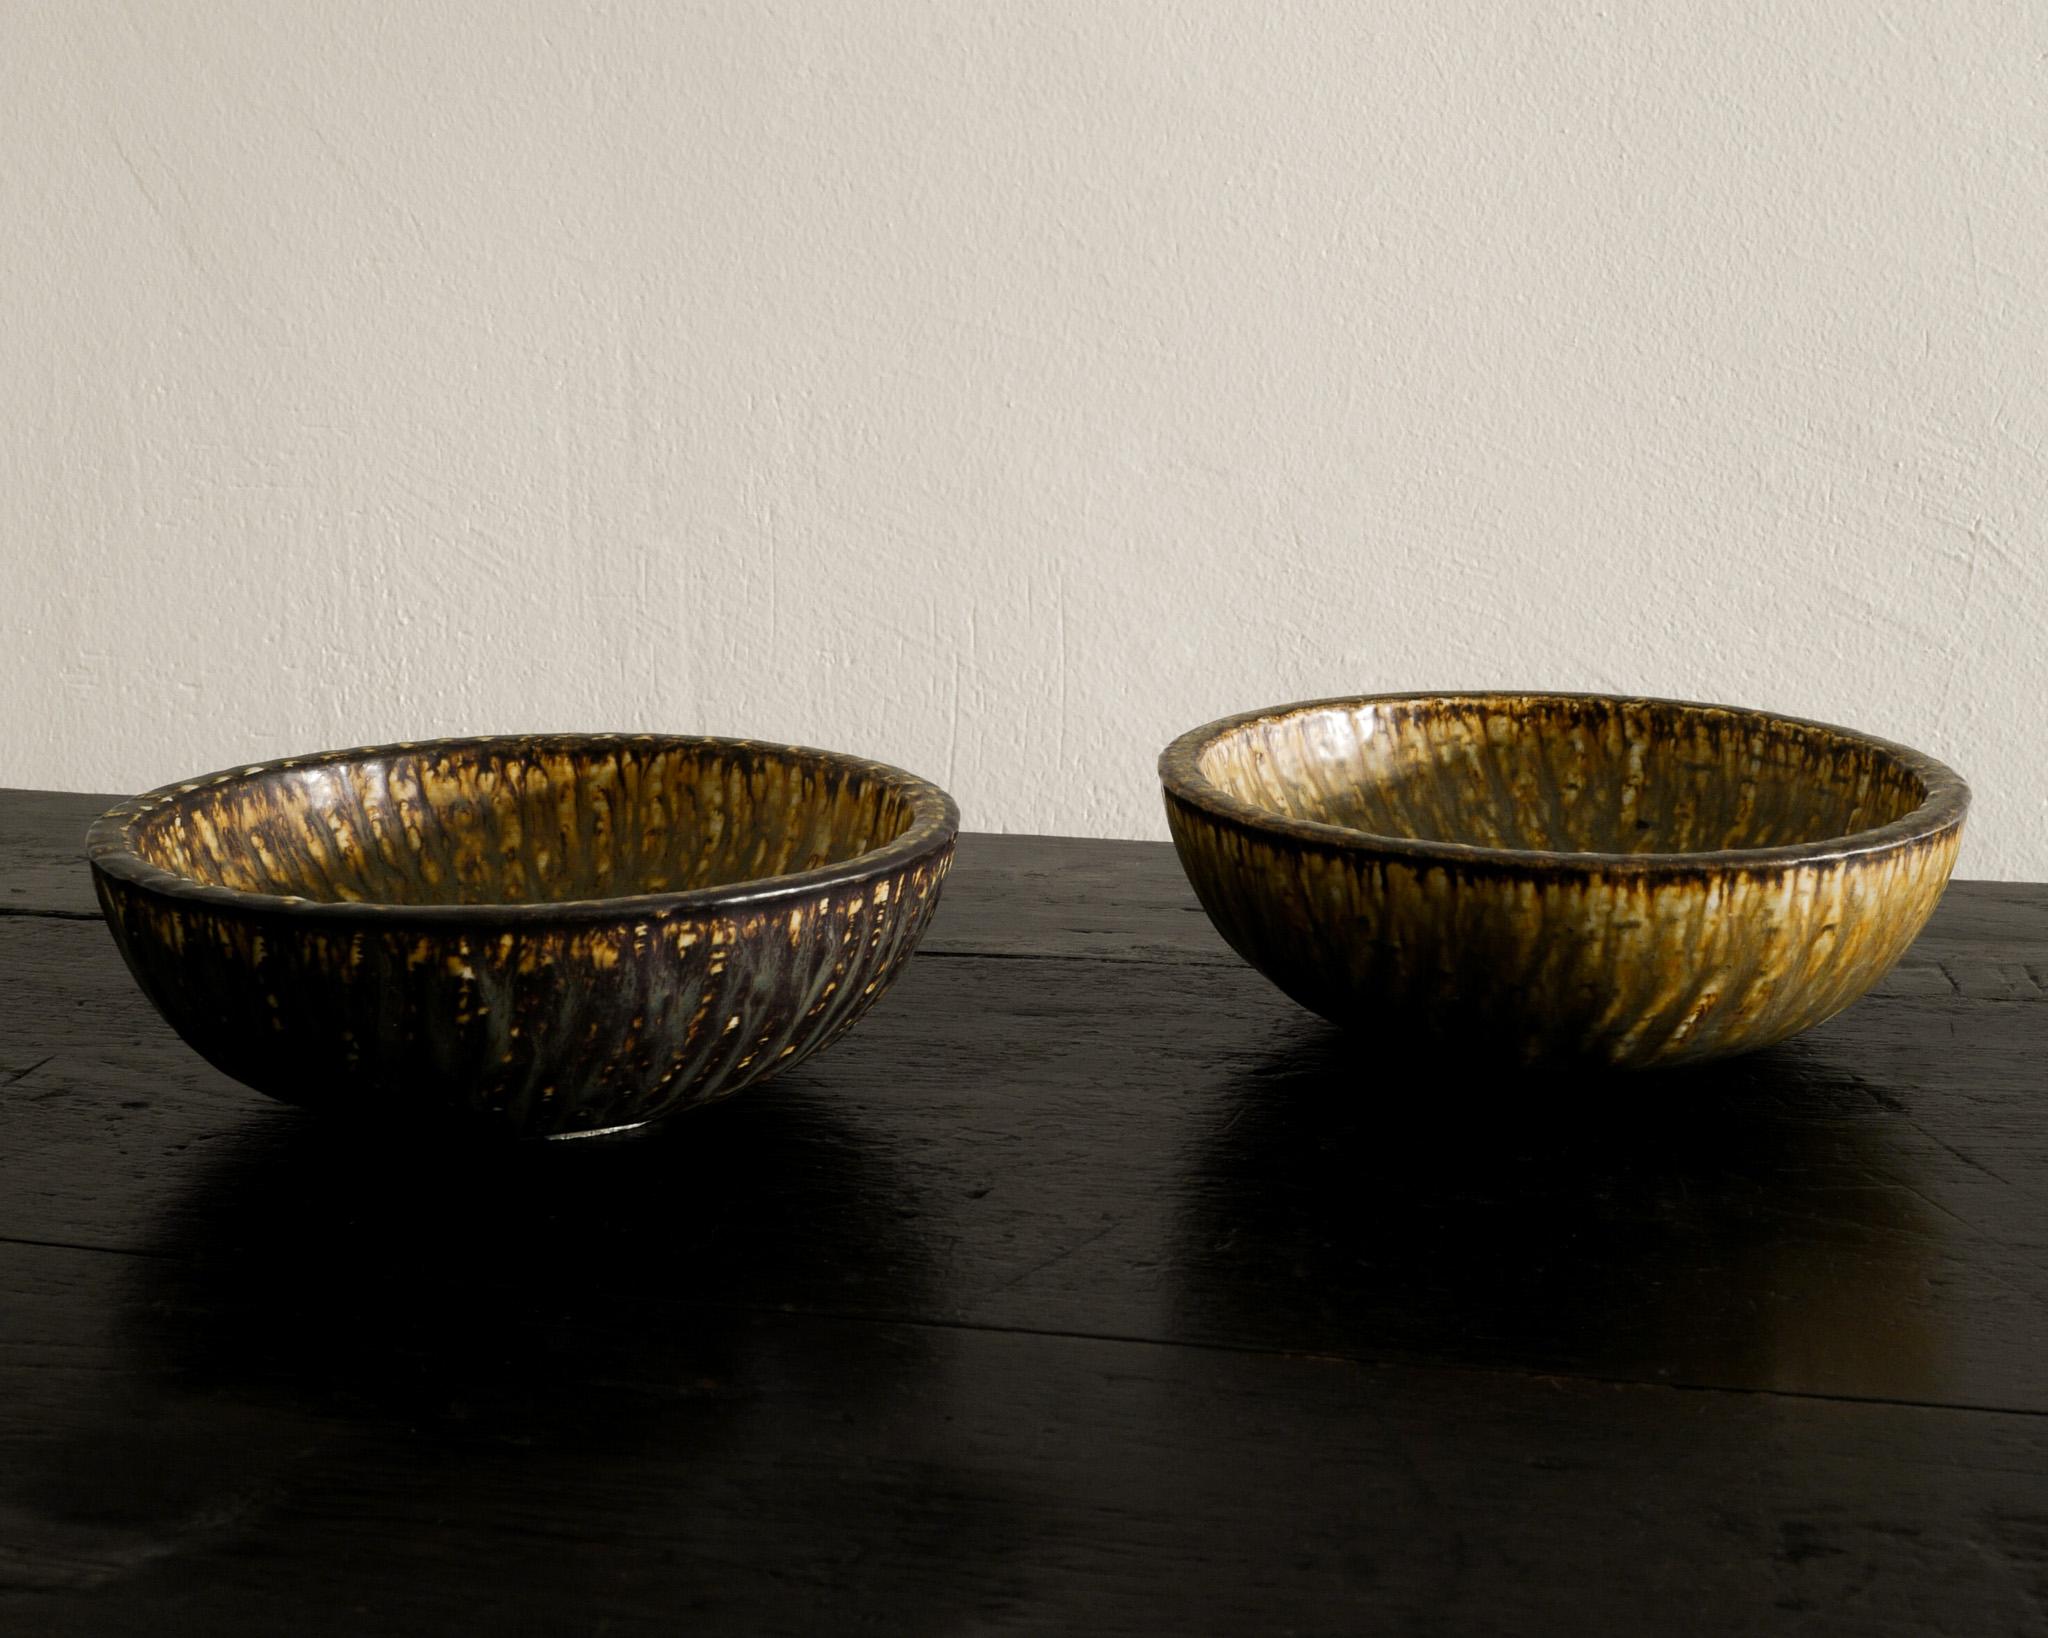 Rare pair of mid century ceramic bowls / dishes from the 